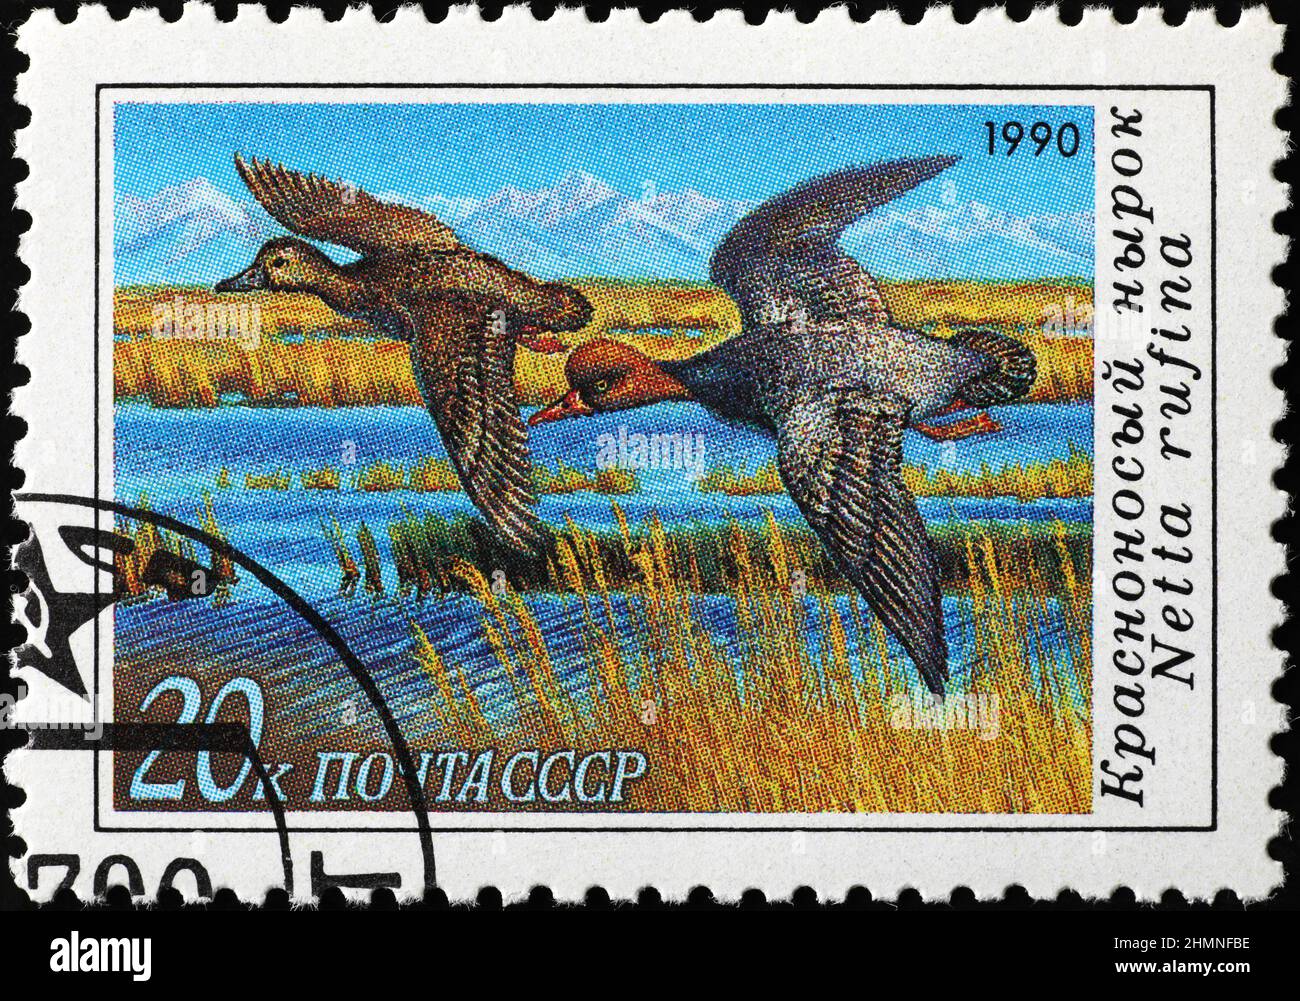 Red-crested pochards in flight on russian postage stamp Stock Photo